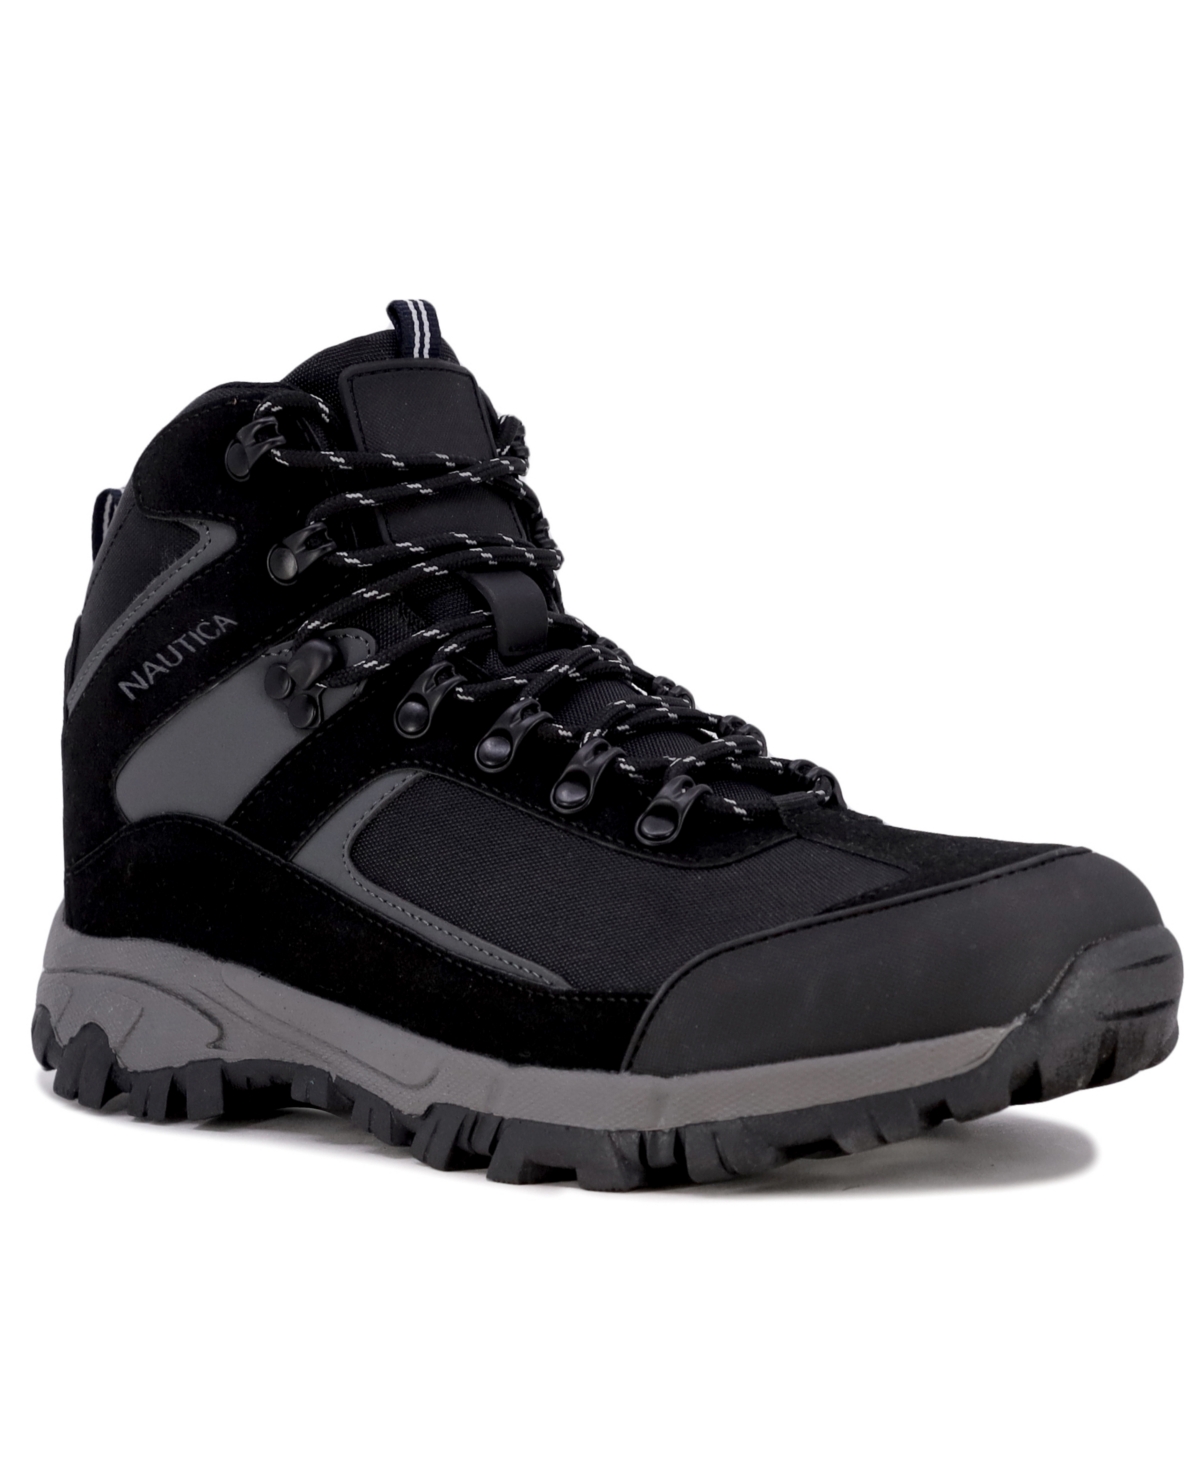 Nautica Men's Borego Hiking Lace-up Boots In Black